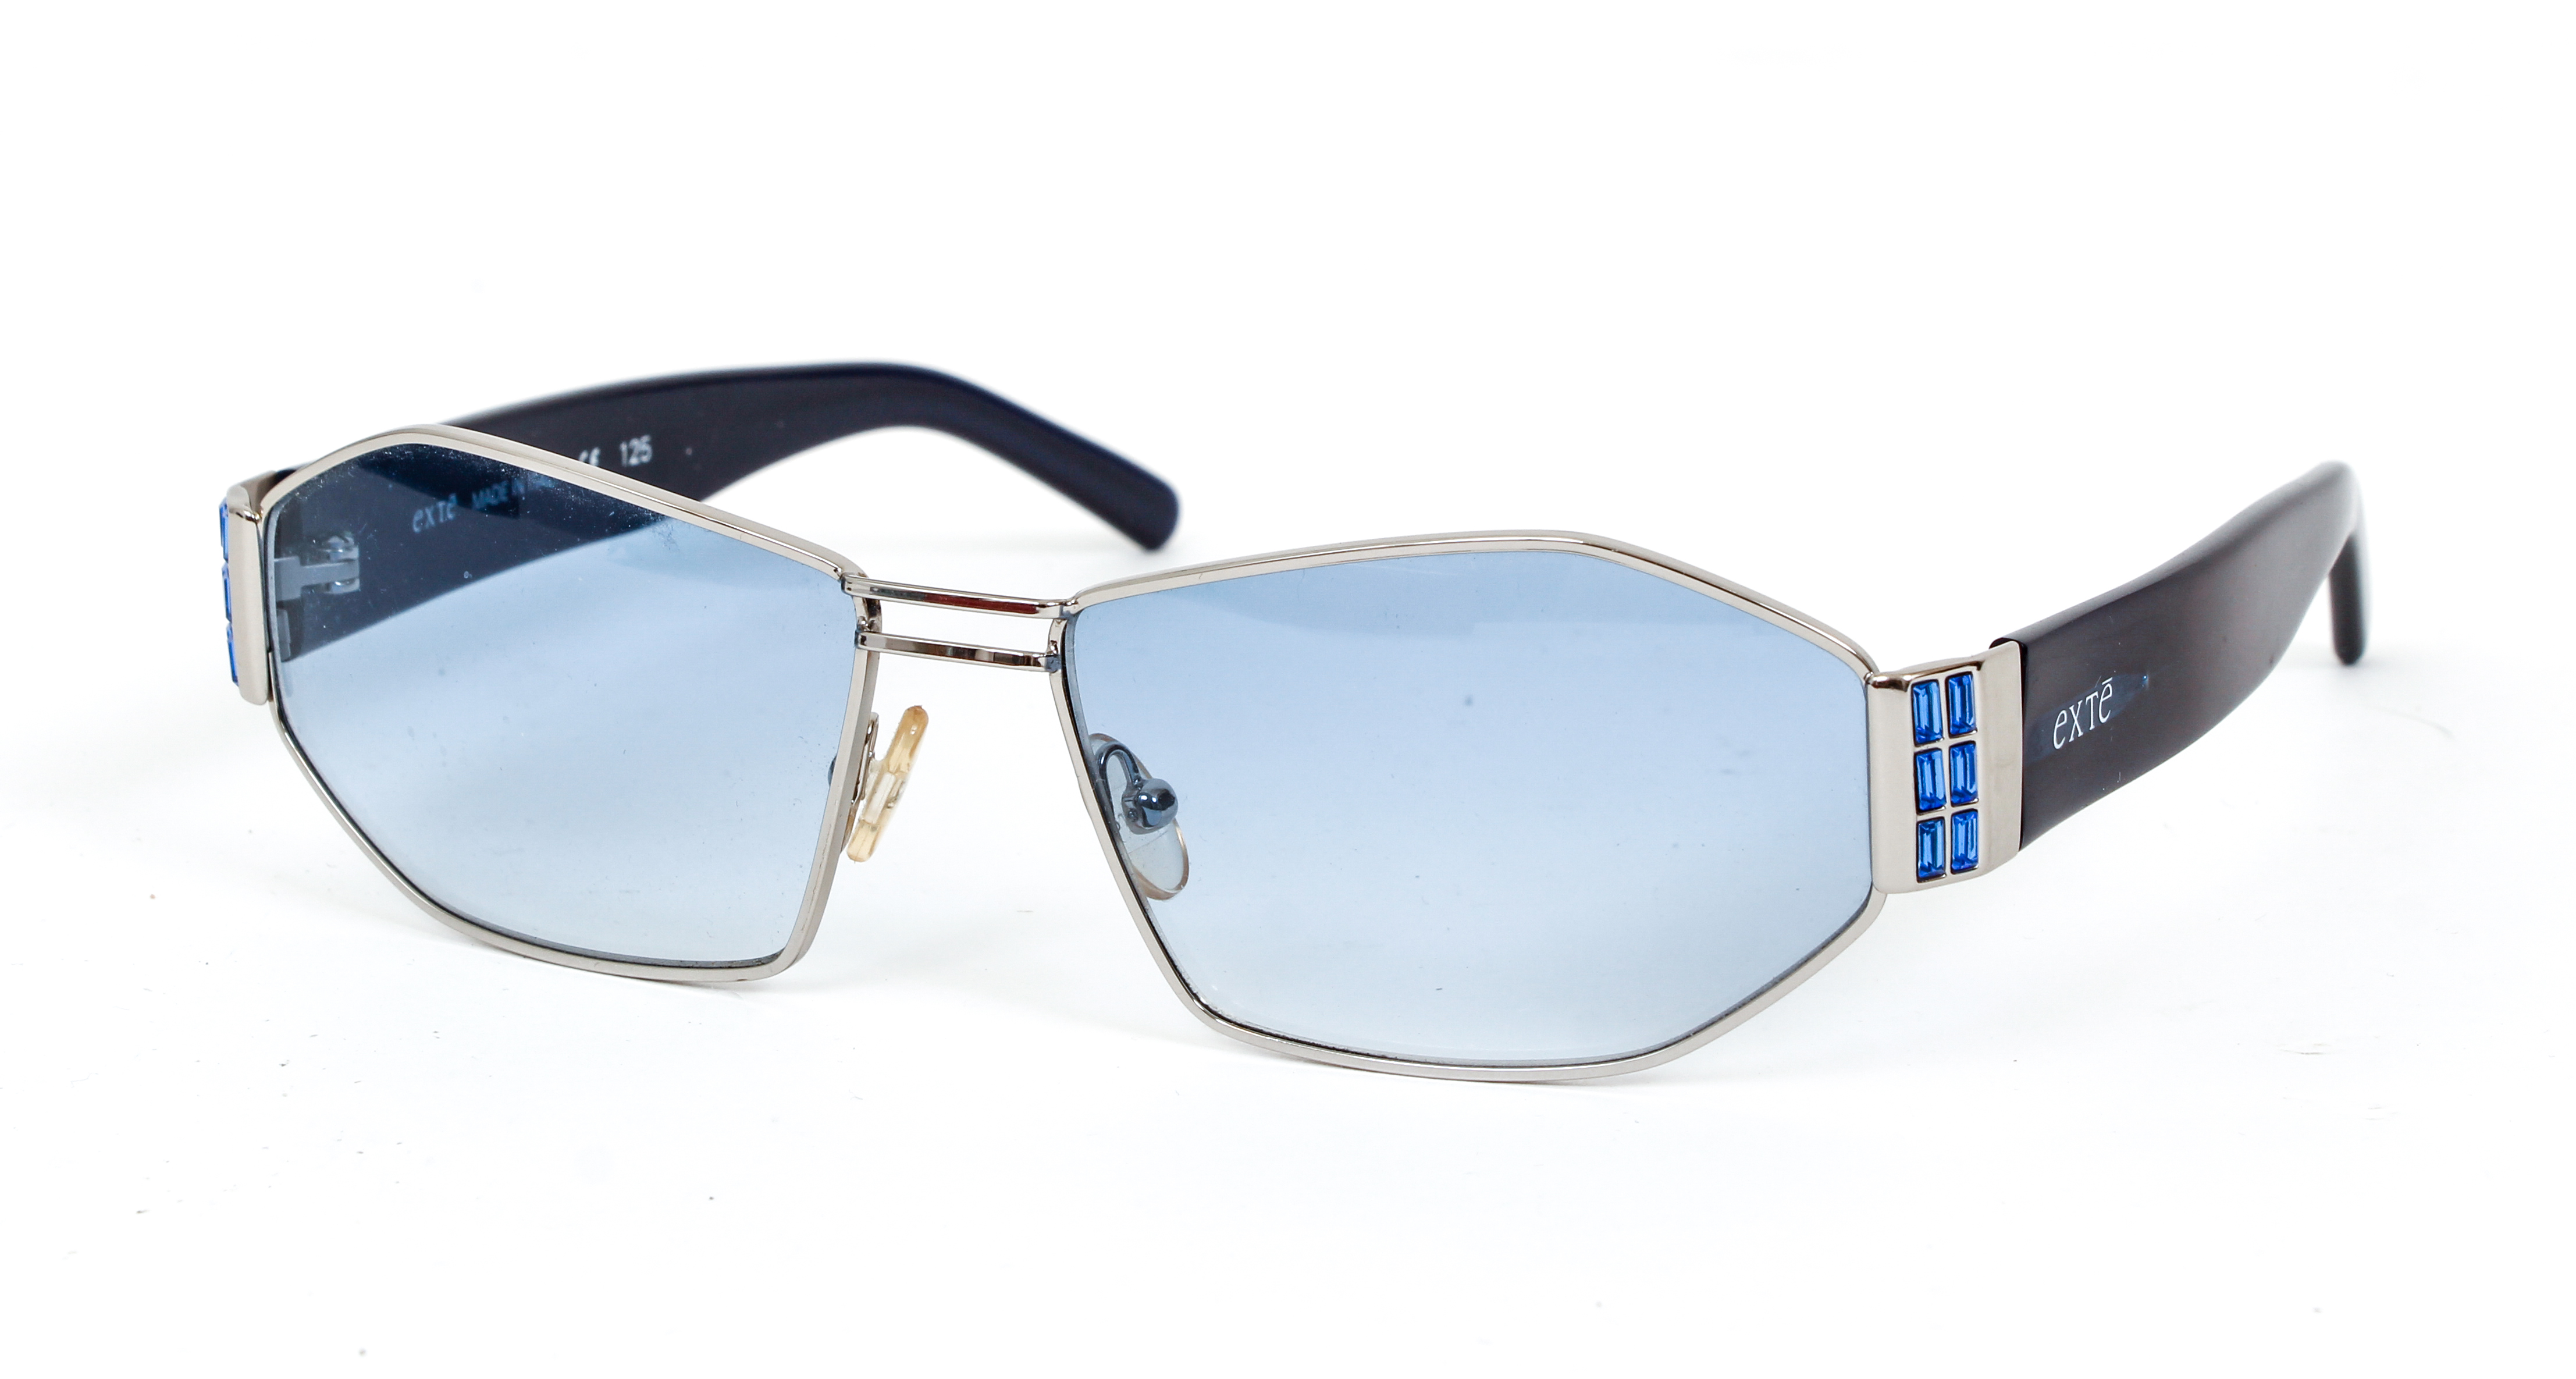 Cartier Sunglasses with blue lenses and sequins